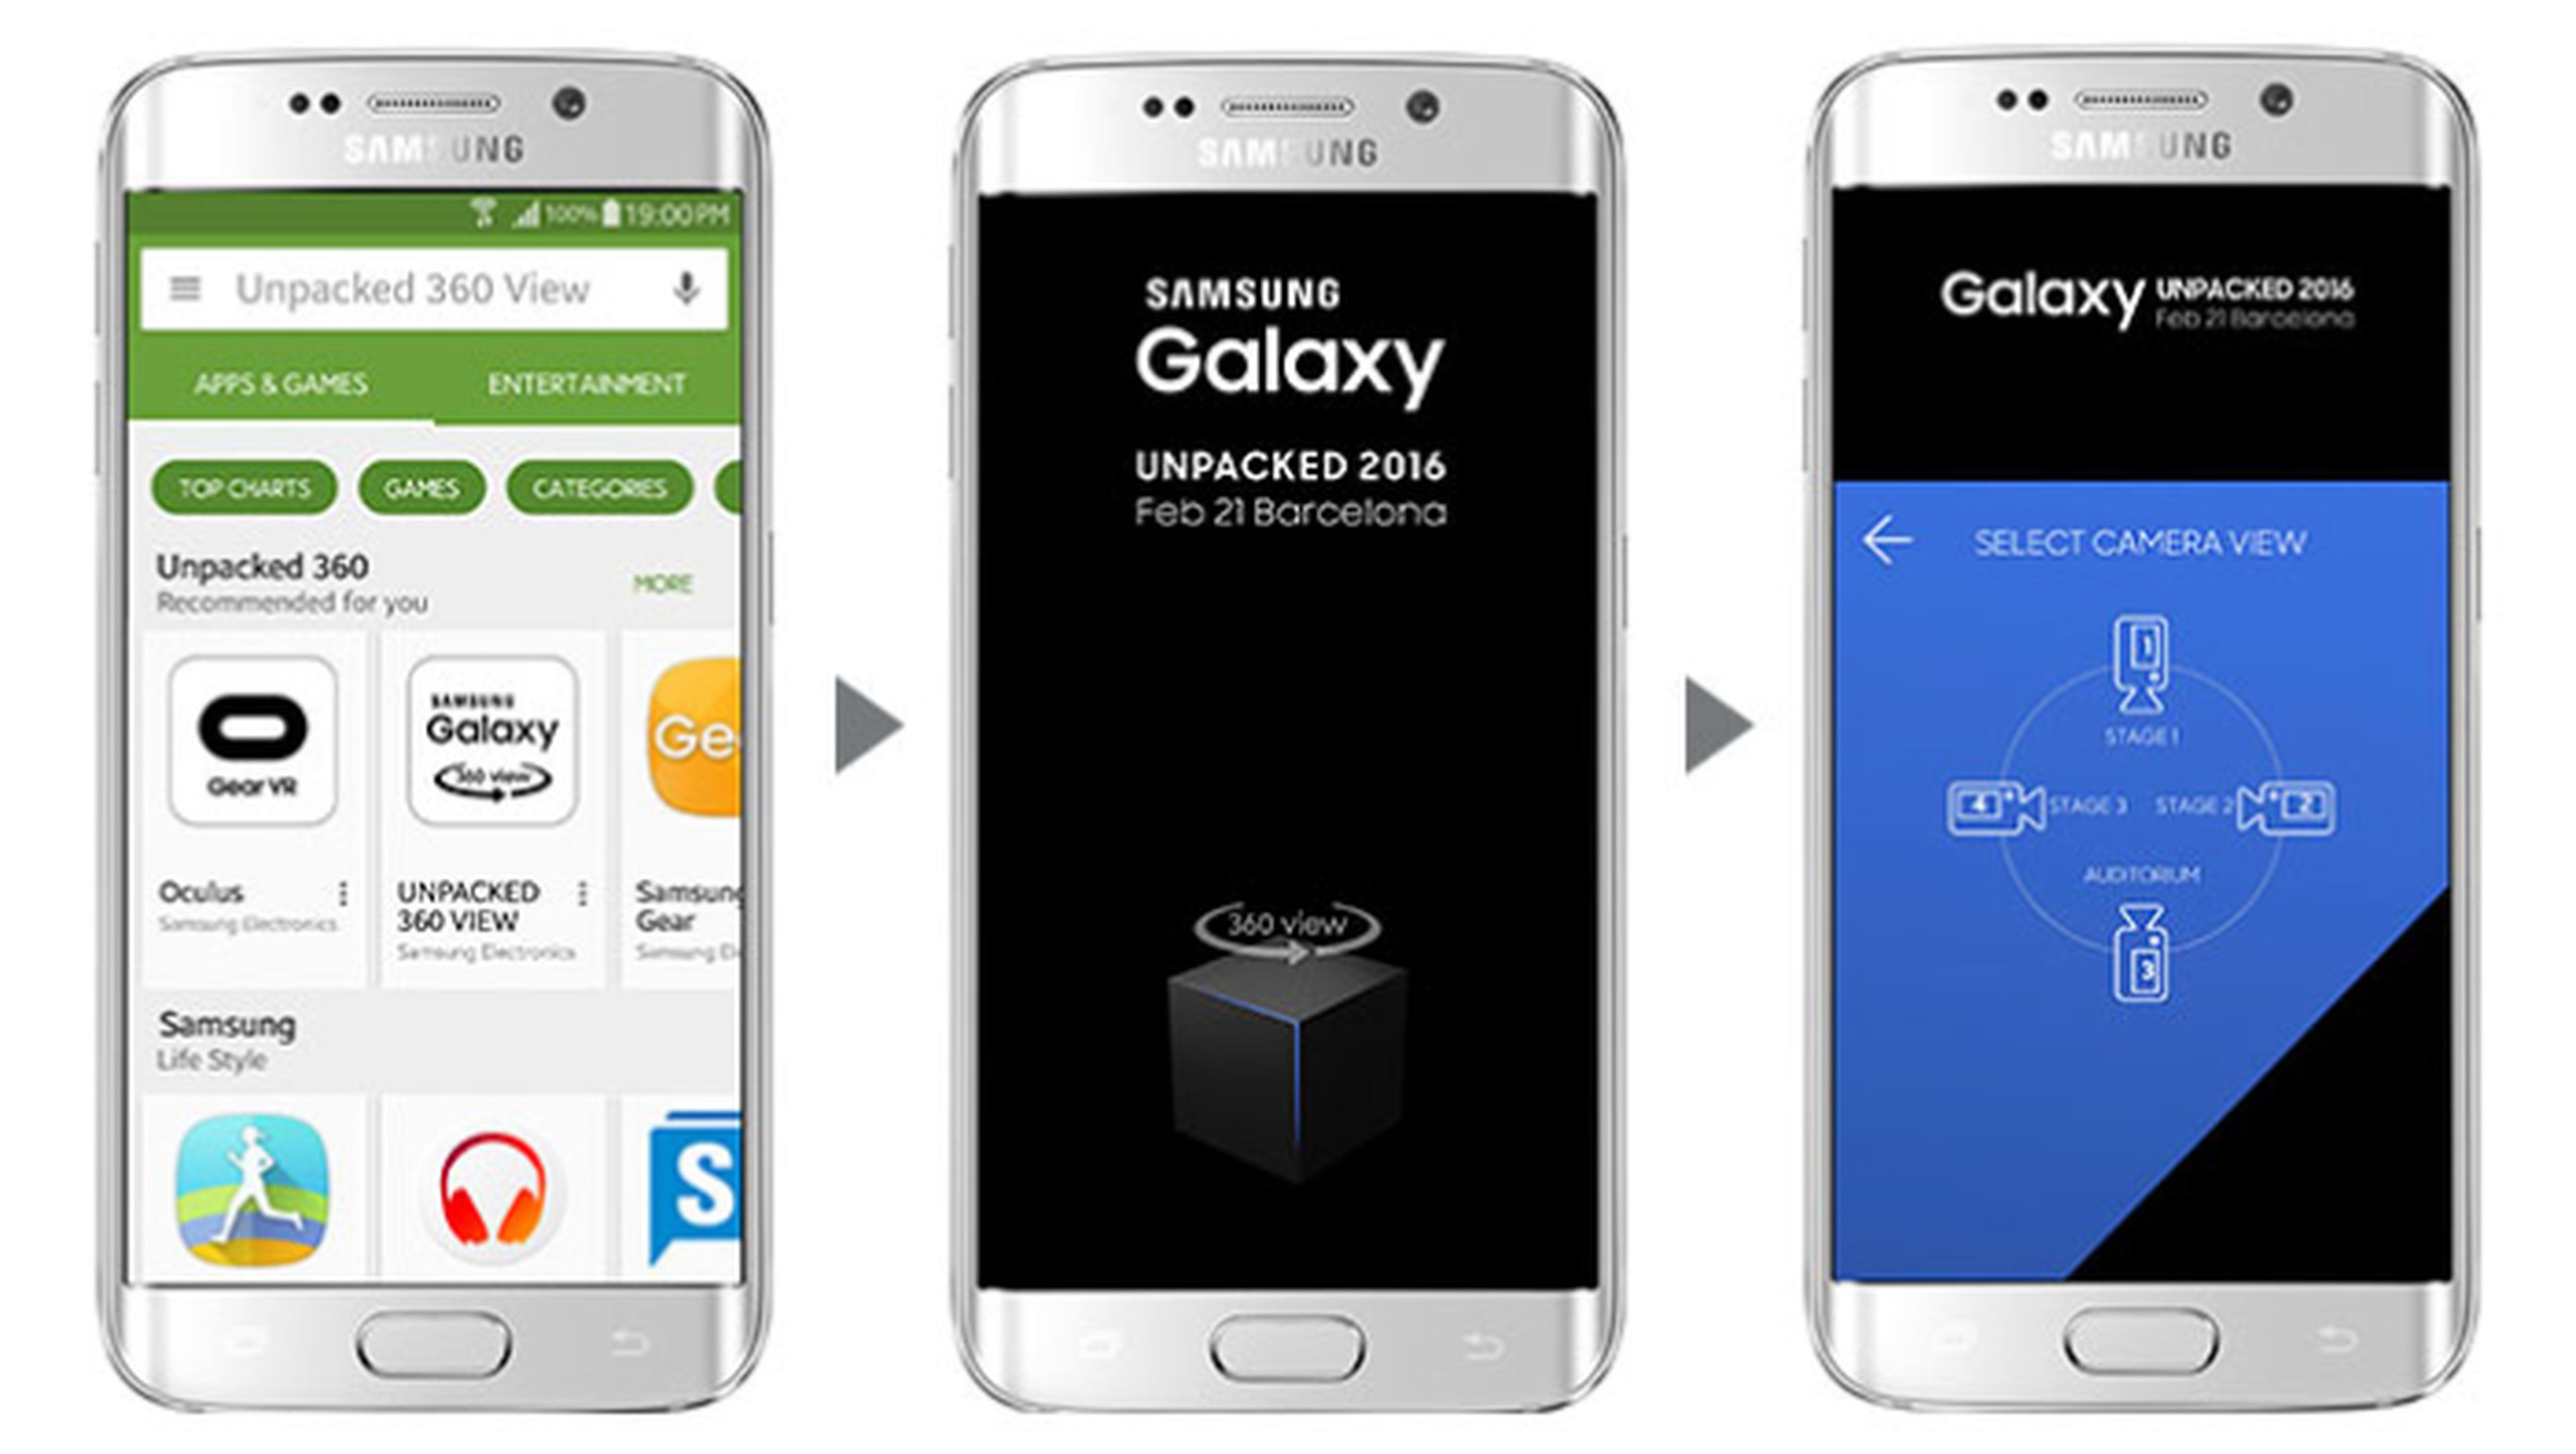 Samsung Unpacked Android